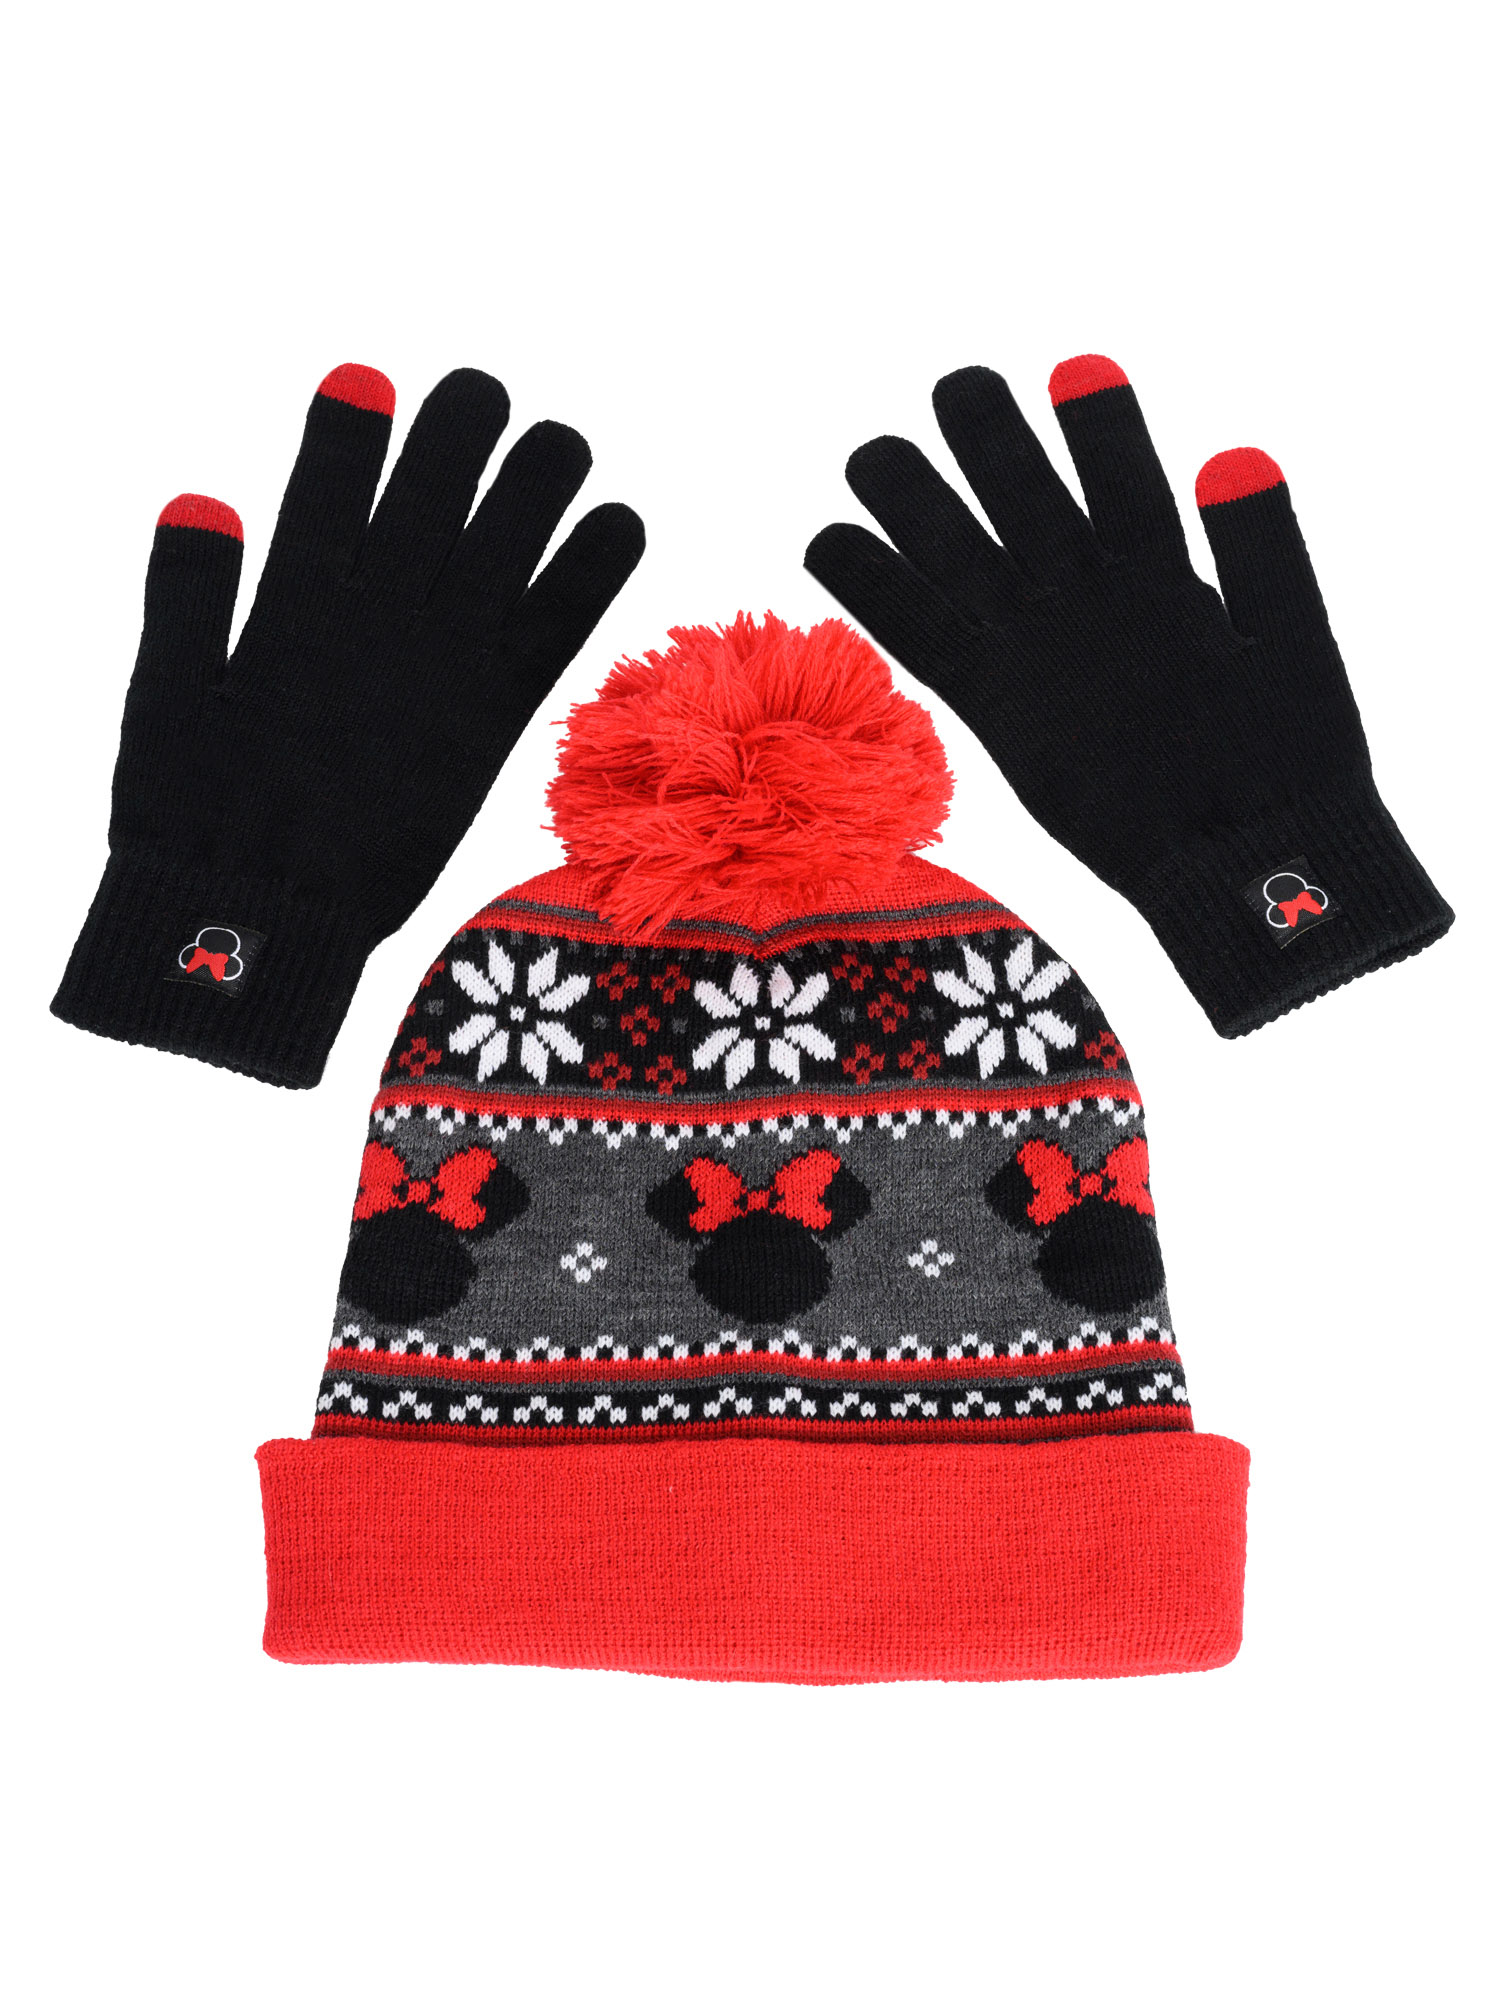 Disney Minnie Mouse Beanie Hat with Gloves Touch Screen Disney Women's Knit Red Set